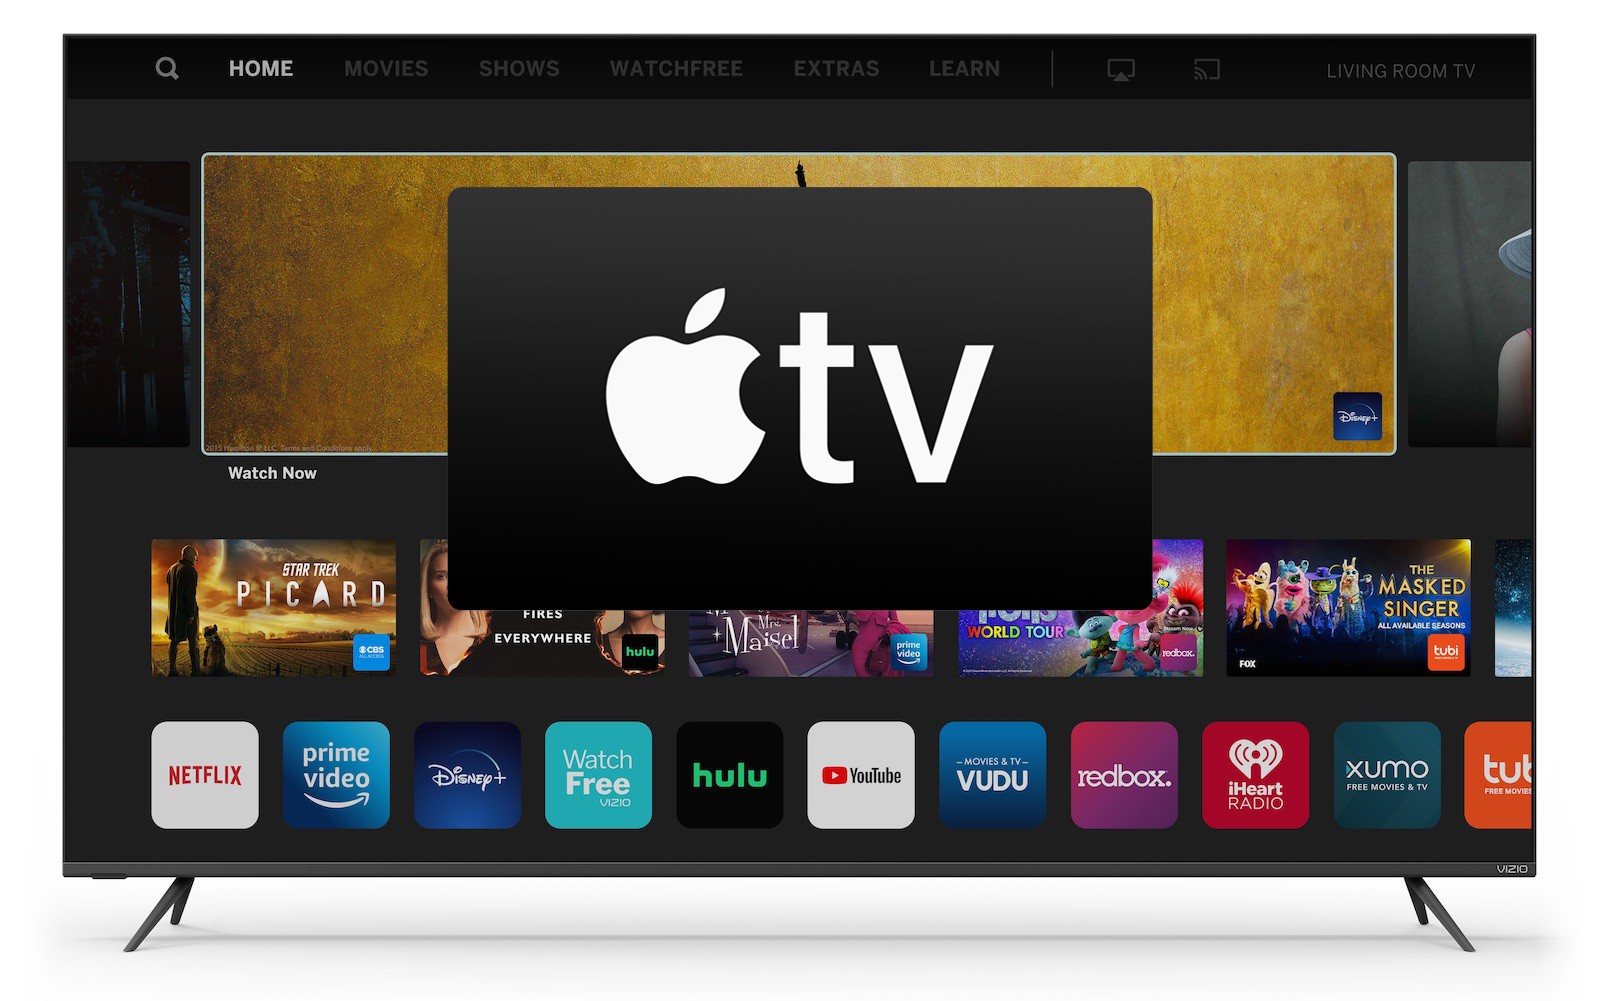 Apple TV App Now Available on VIZIO SmartCast TVs in U.S. and Canada